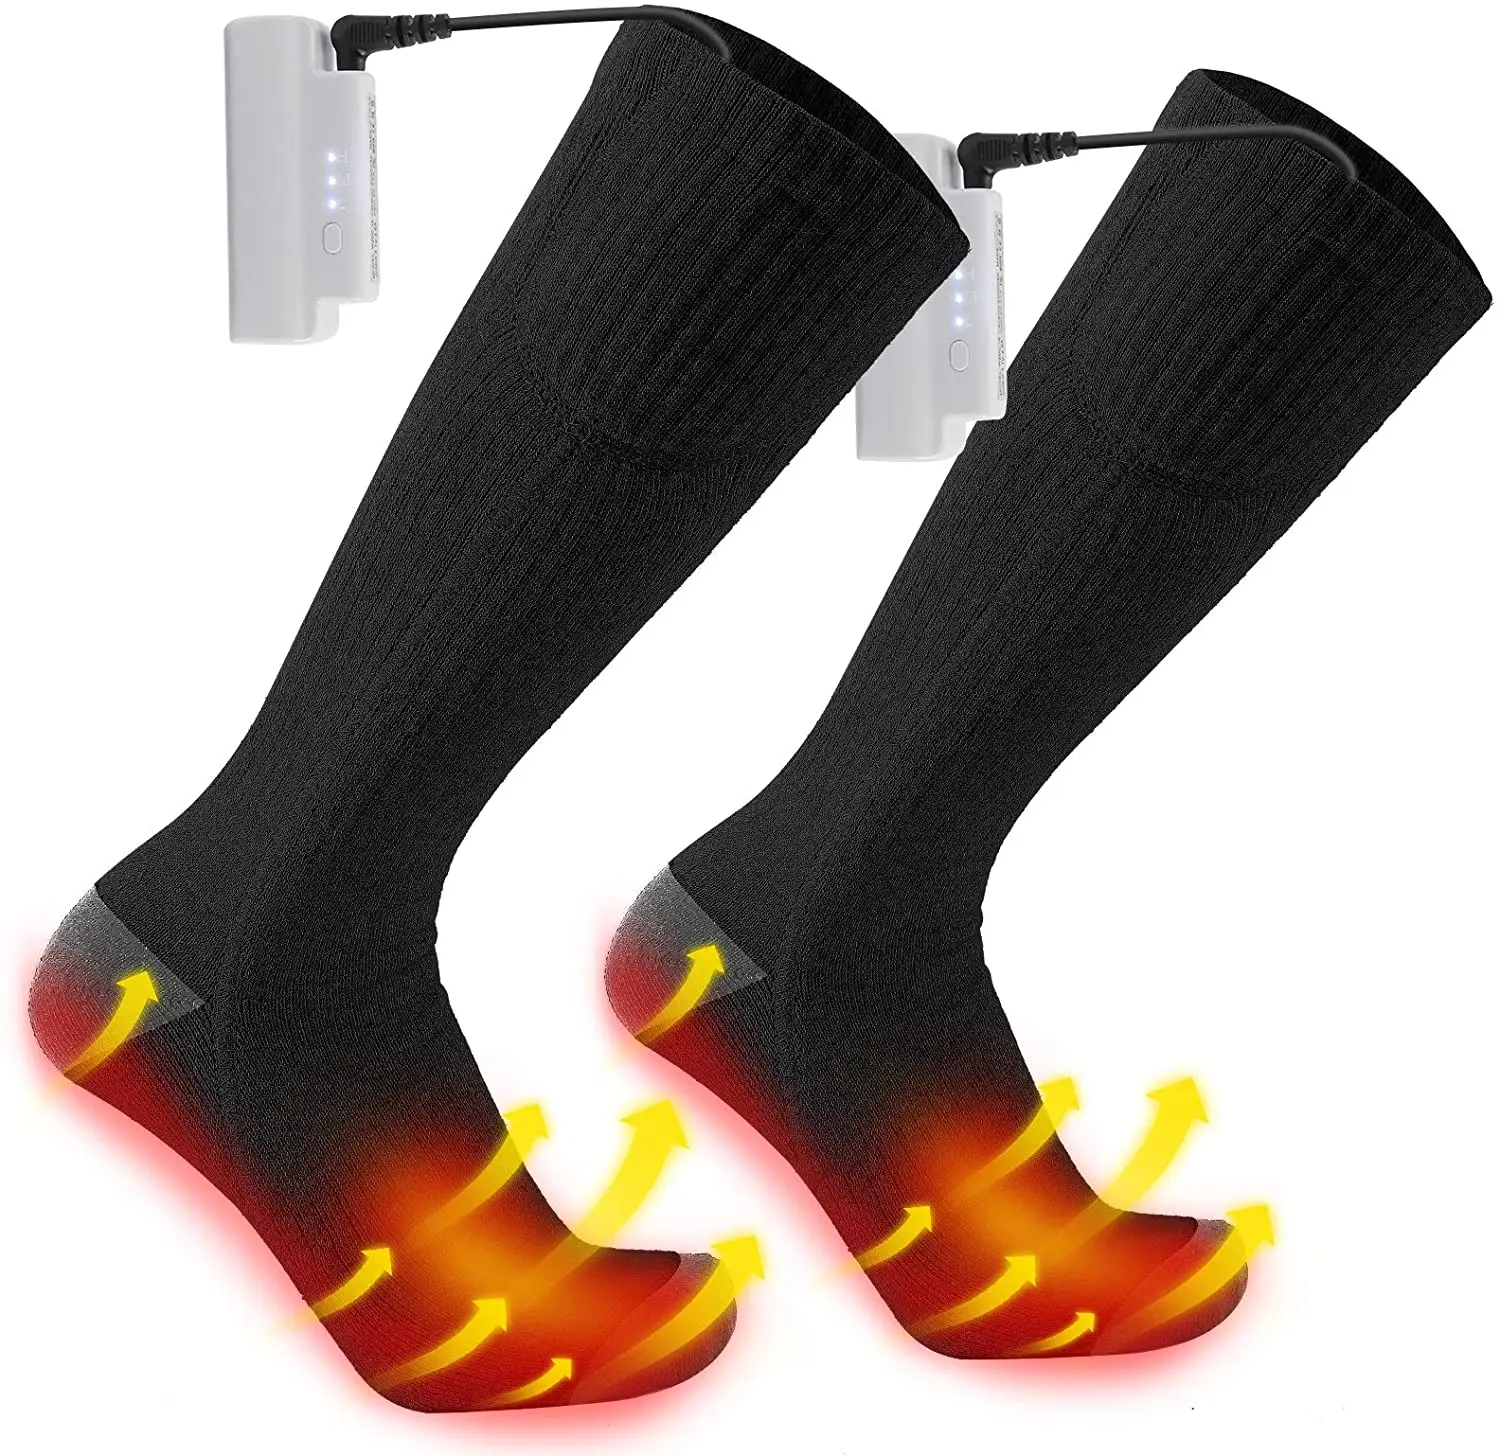 Electric Heated Socks Rechargeable Battery 3.7V Foot Winter Foot Warm Skiing NEW 